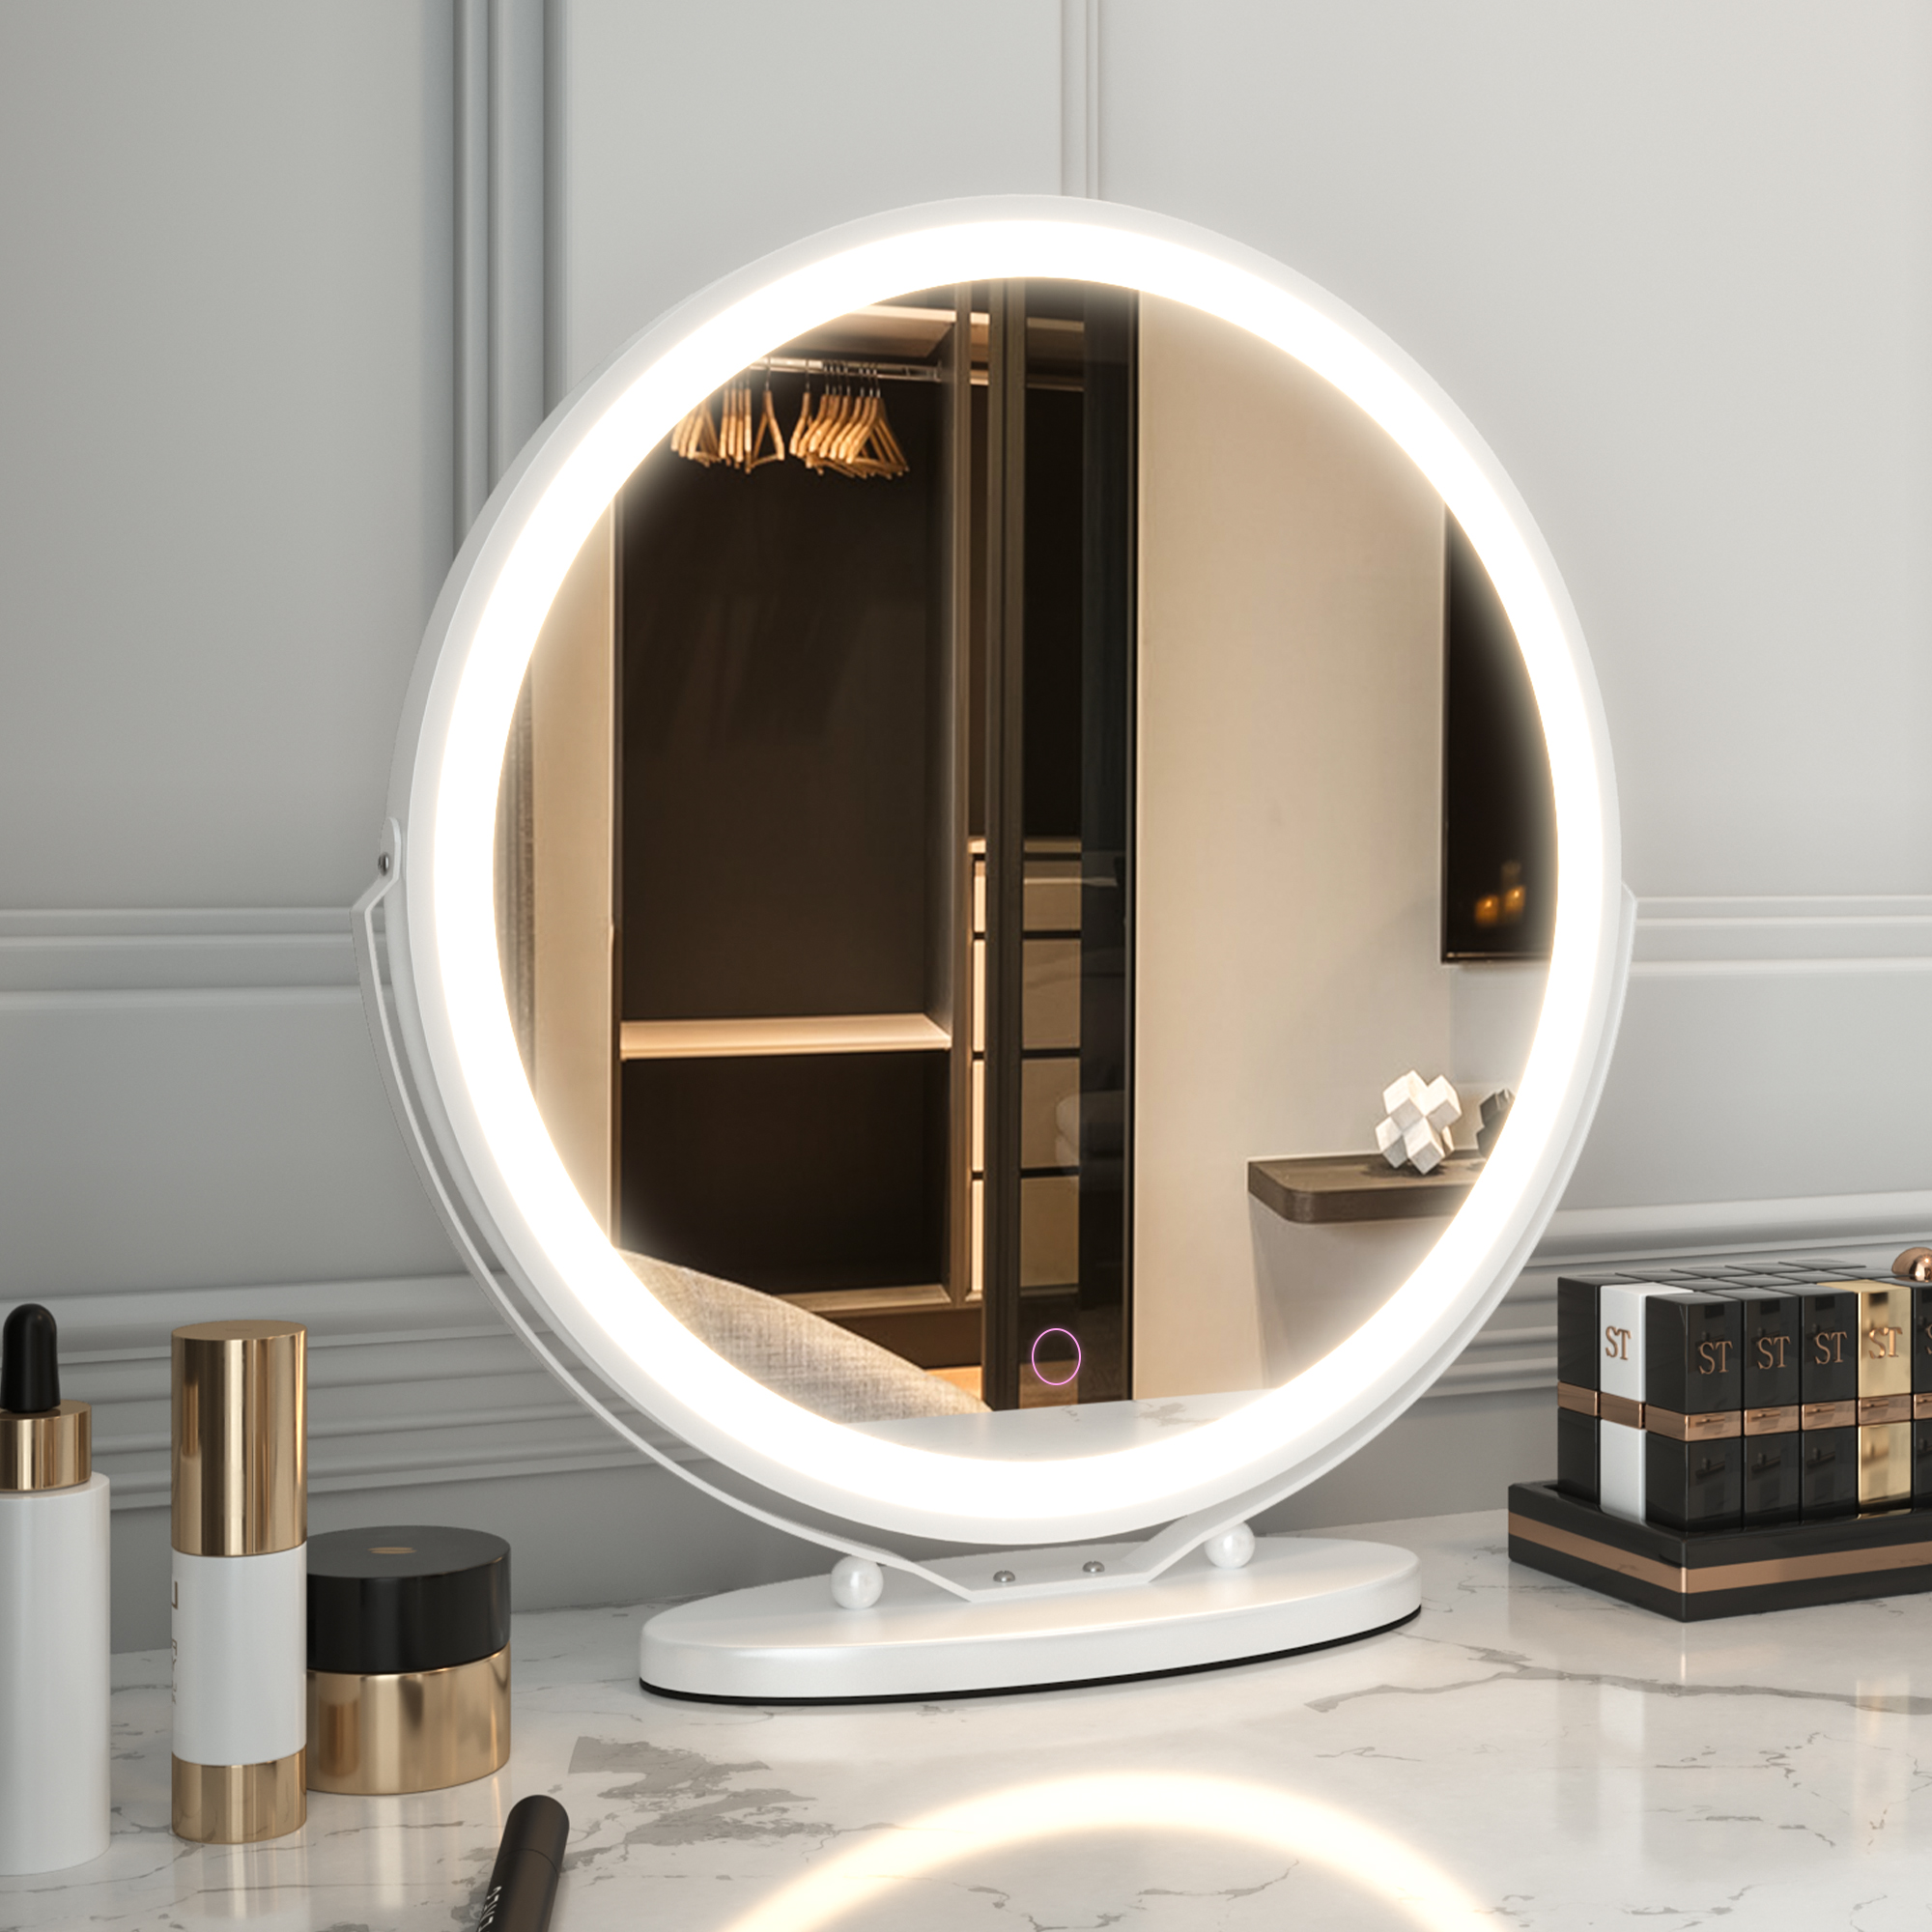  Vanity Makeup Mirror with Lights, 3 Color Lighting Dimmable LED Mirror, Touch Control, 360°Rotation, High-Definition Large Round Lighted Up Mirror for Bedroom Table Desk （gold)